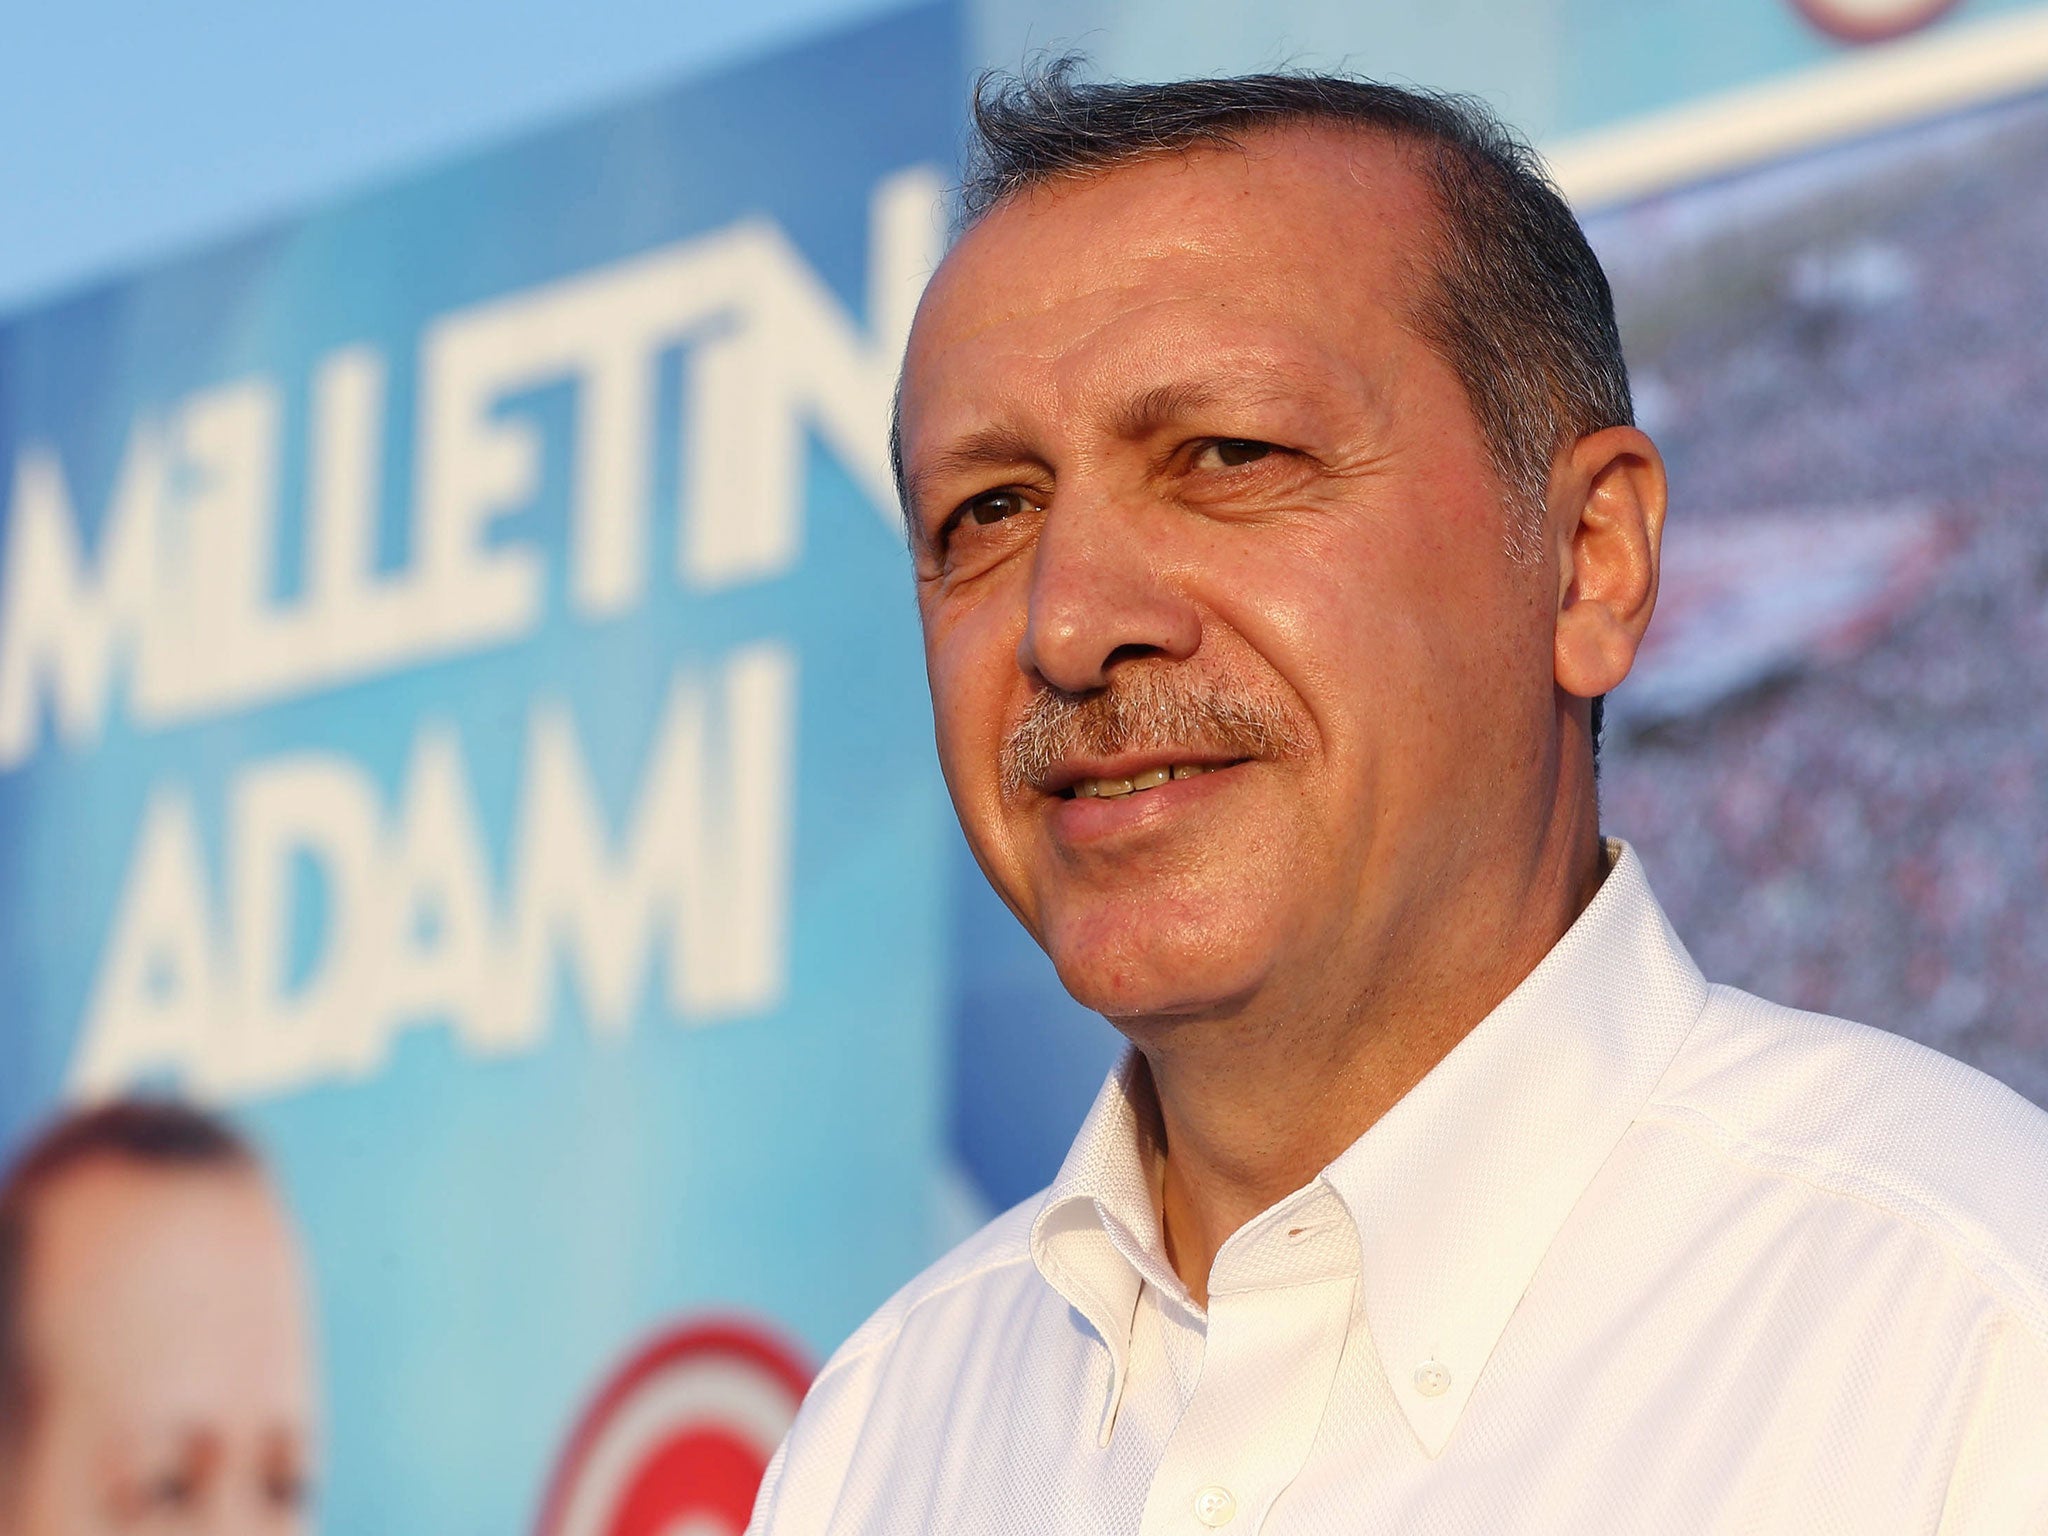 Tayyip Erdogan, pictured, has called on the support of businessmen in fighting Fethullah Gulen’s movement - known as Hizmet, which he accuses of seeking to overthrow him